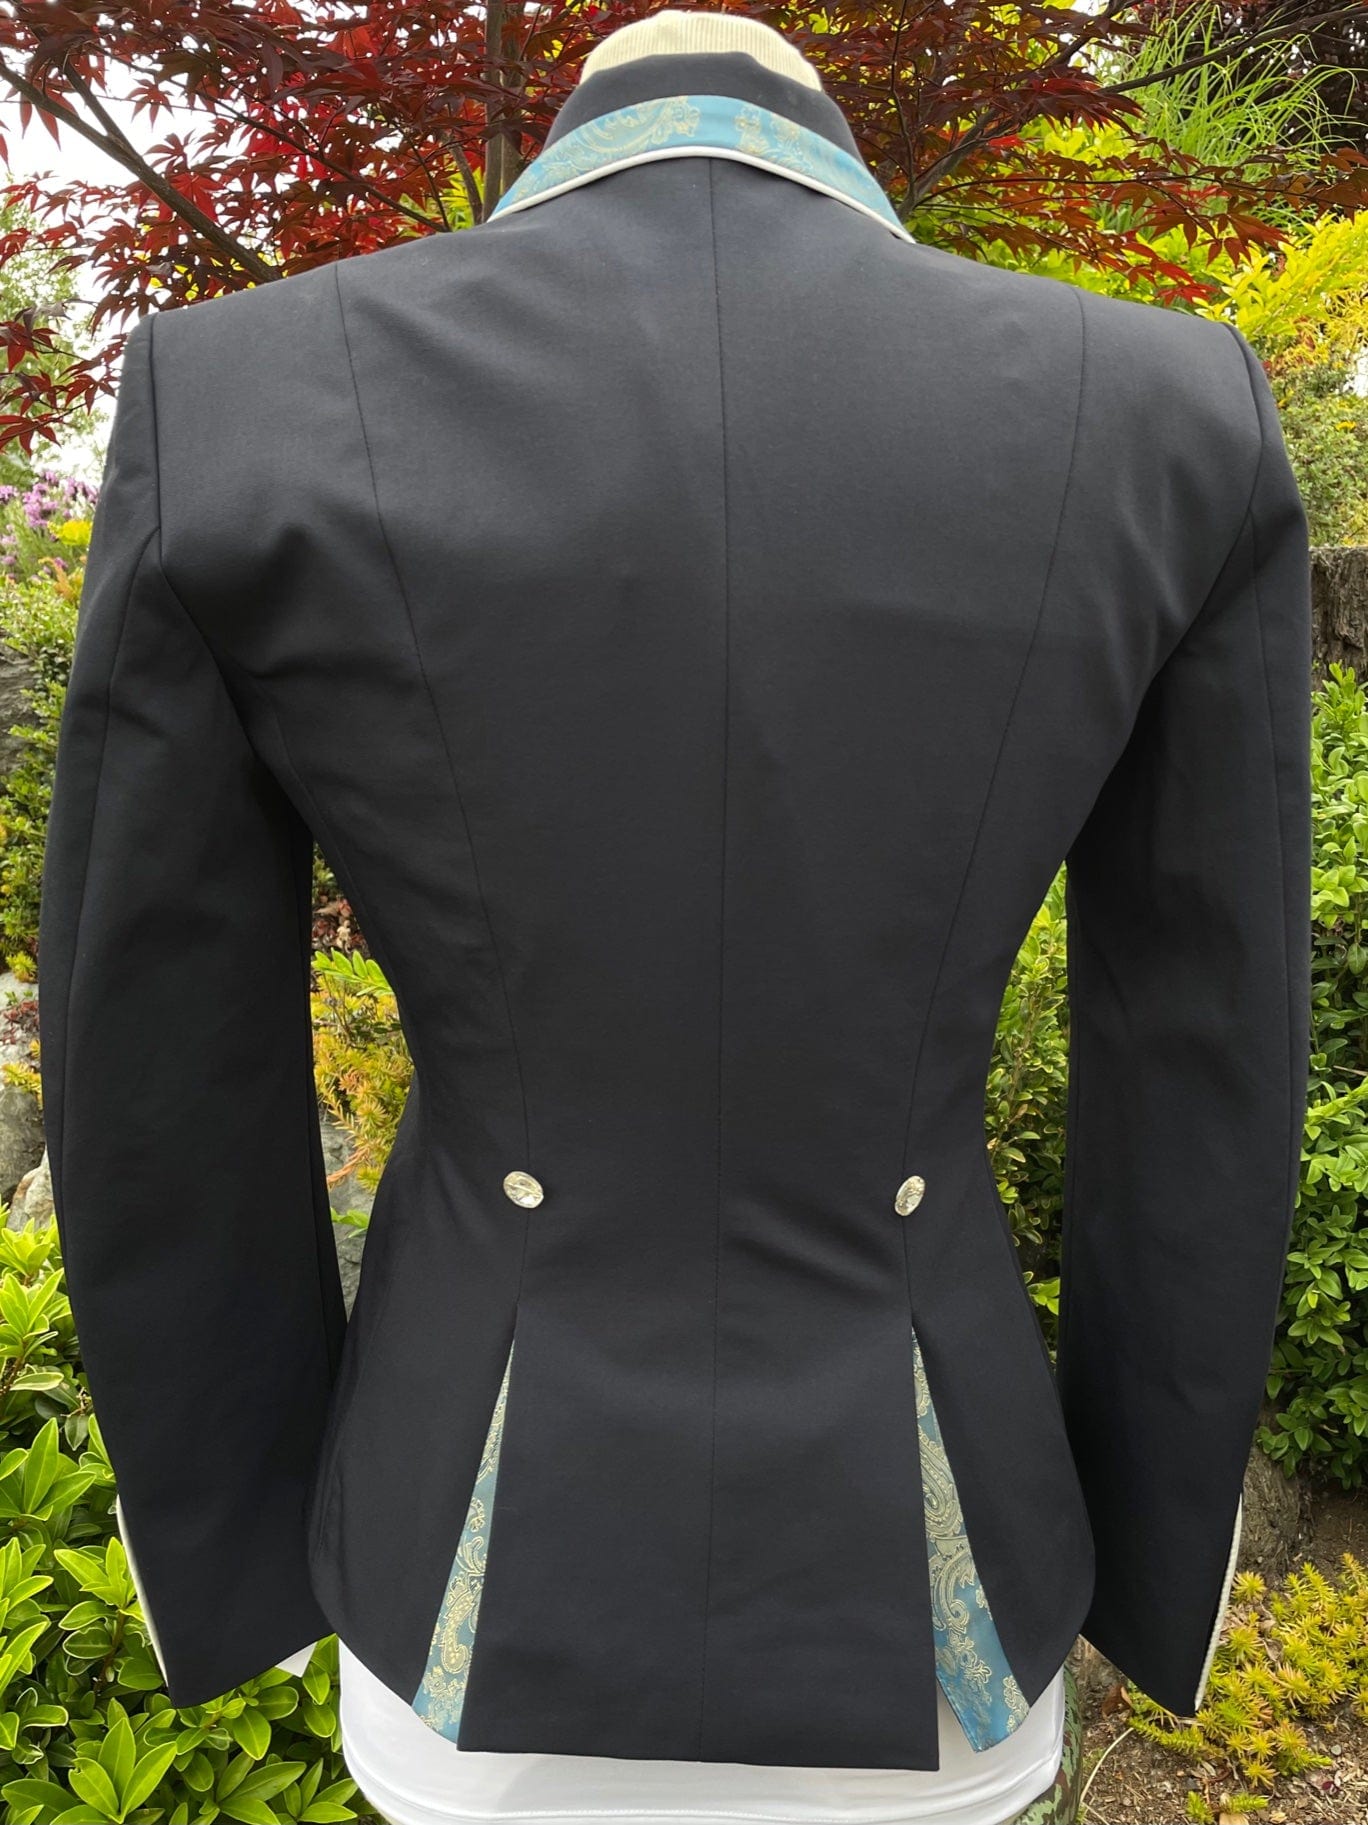 Flying Changes Charlotte Show Coat - Navy Gold Paisley